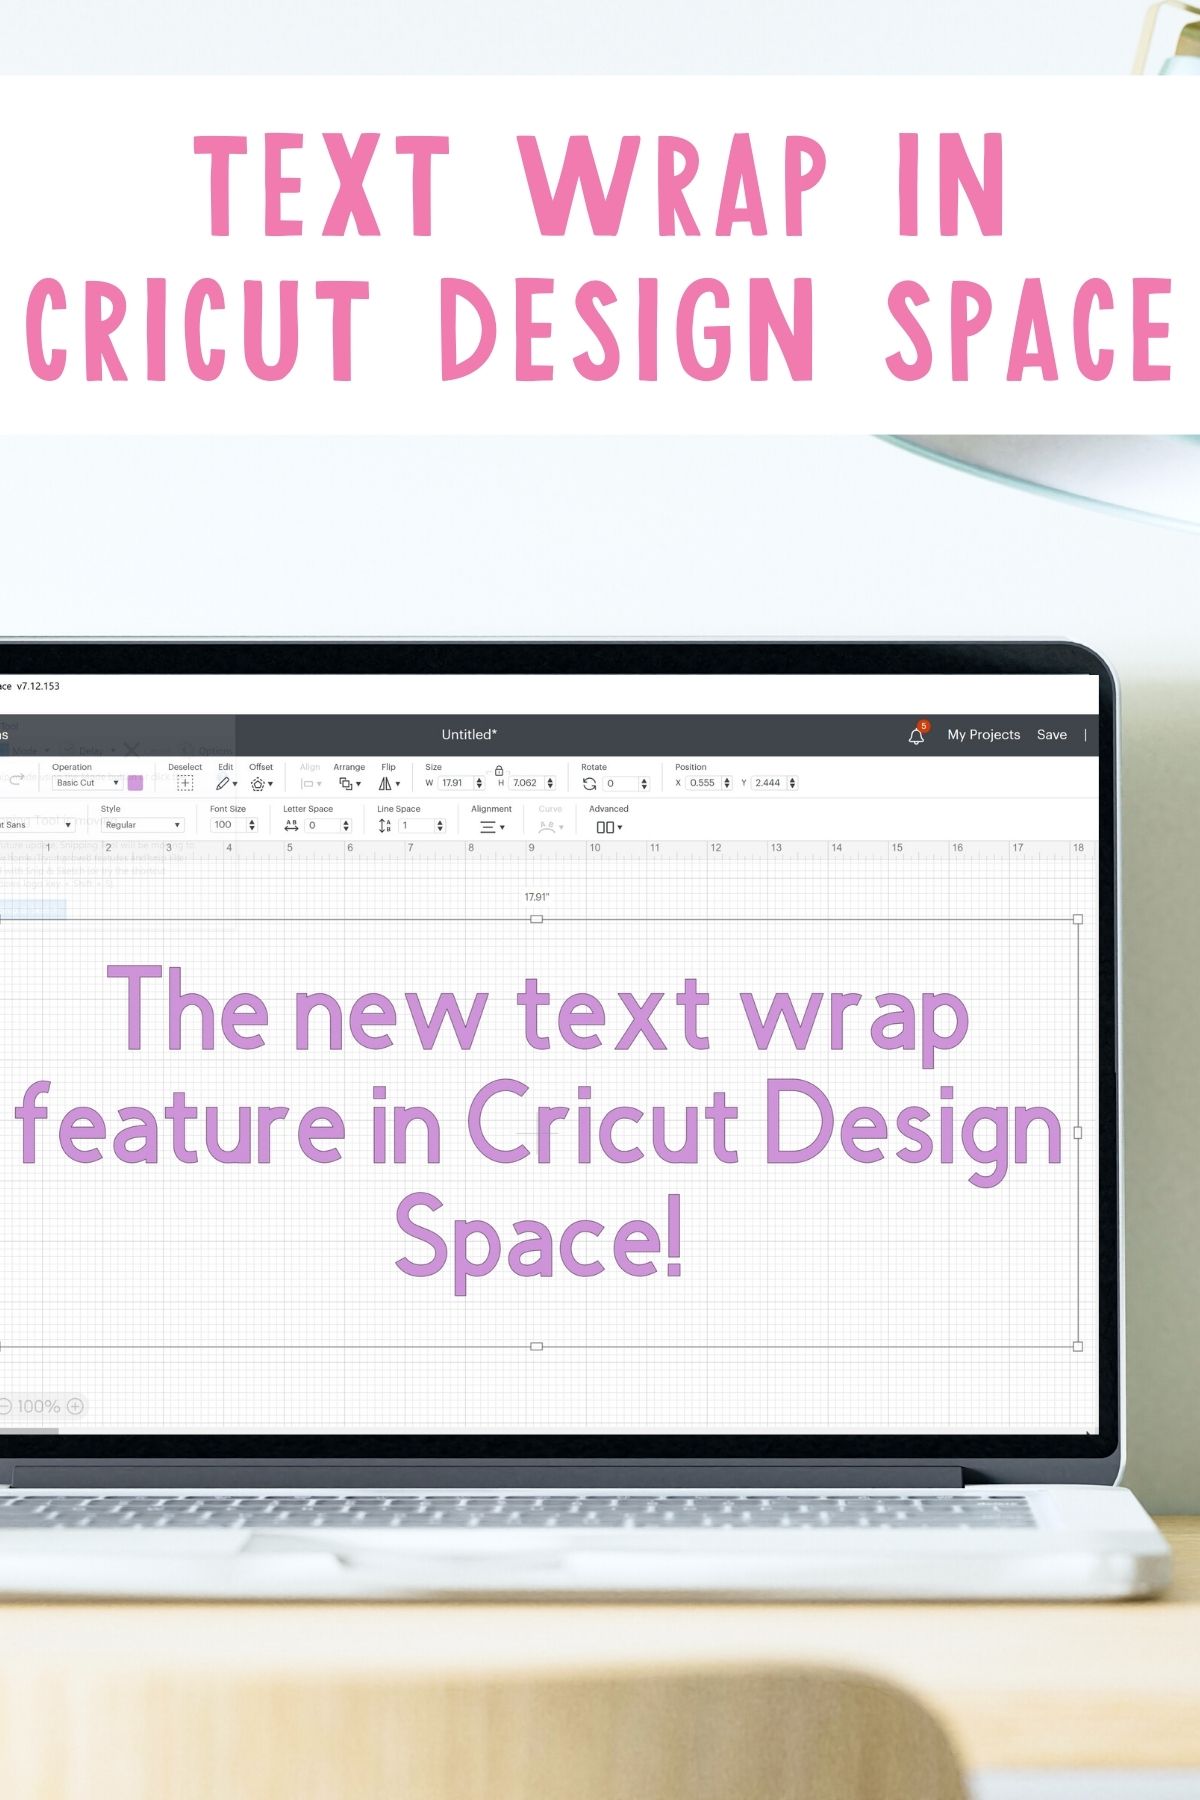 Text wrap in Cricut Design Space tall image.